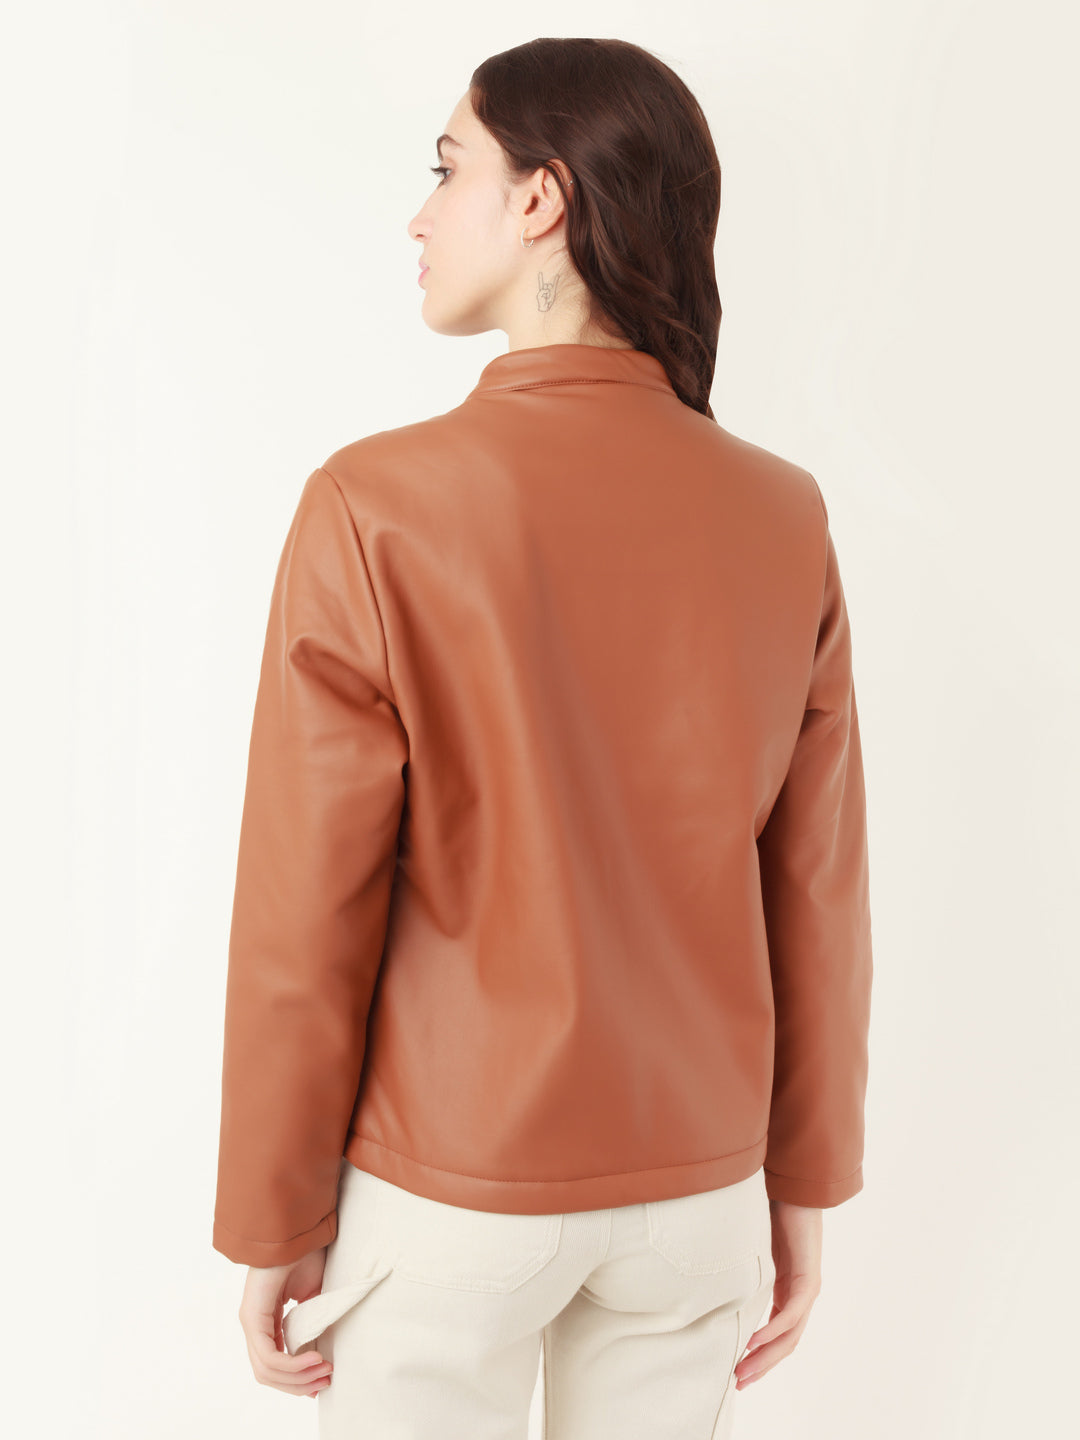 Tan Solid Jacket For Women